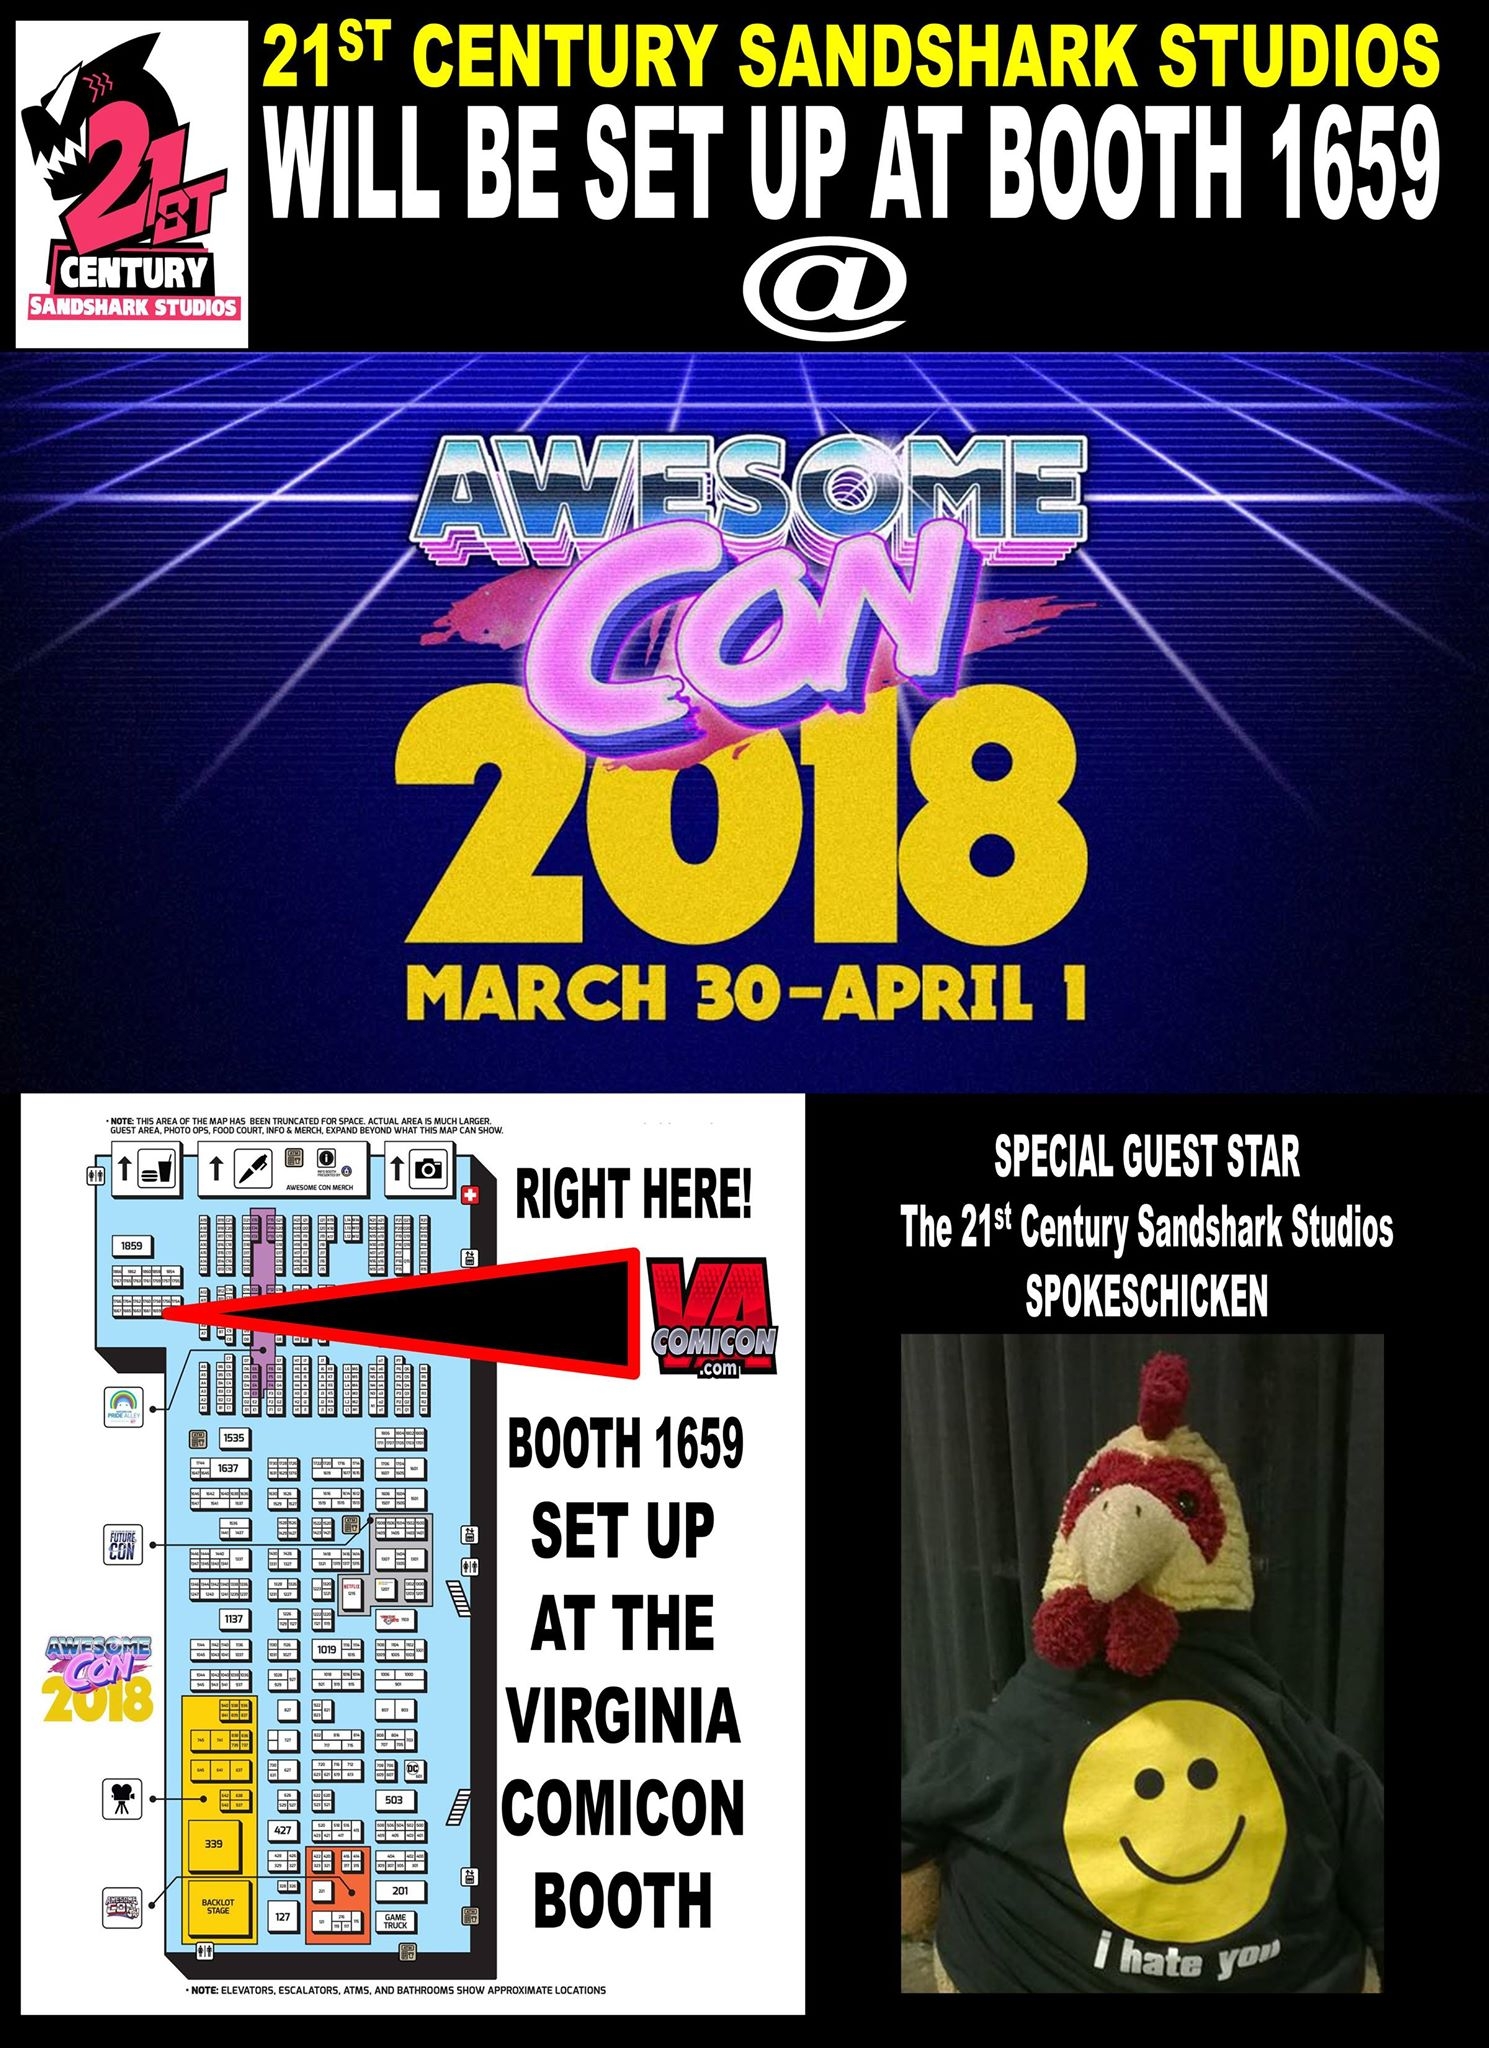 COMIC CON HIGHWAY EXITING  in the SOUTH:: -DC- AWESOME CON will have Dan Nokes hanging out at the VA Comicon booth at 1659  on March 30-April 1